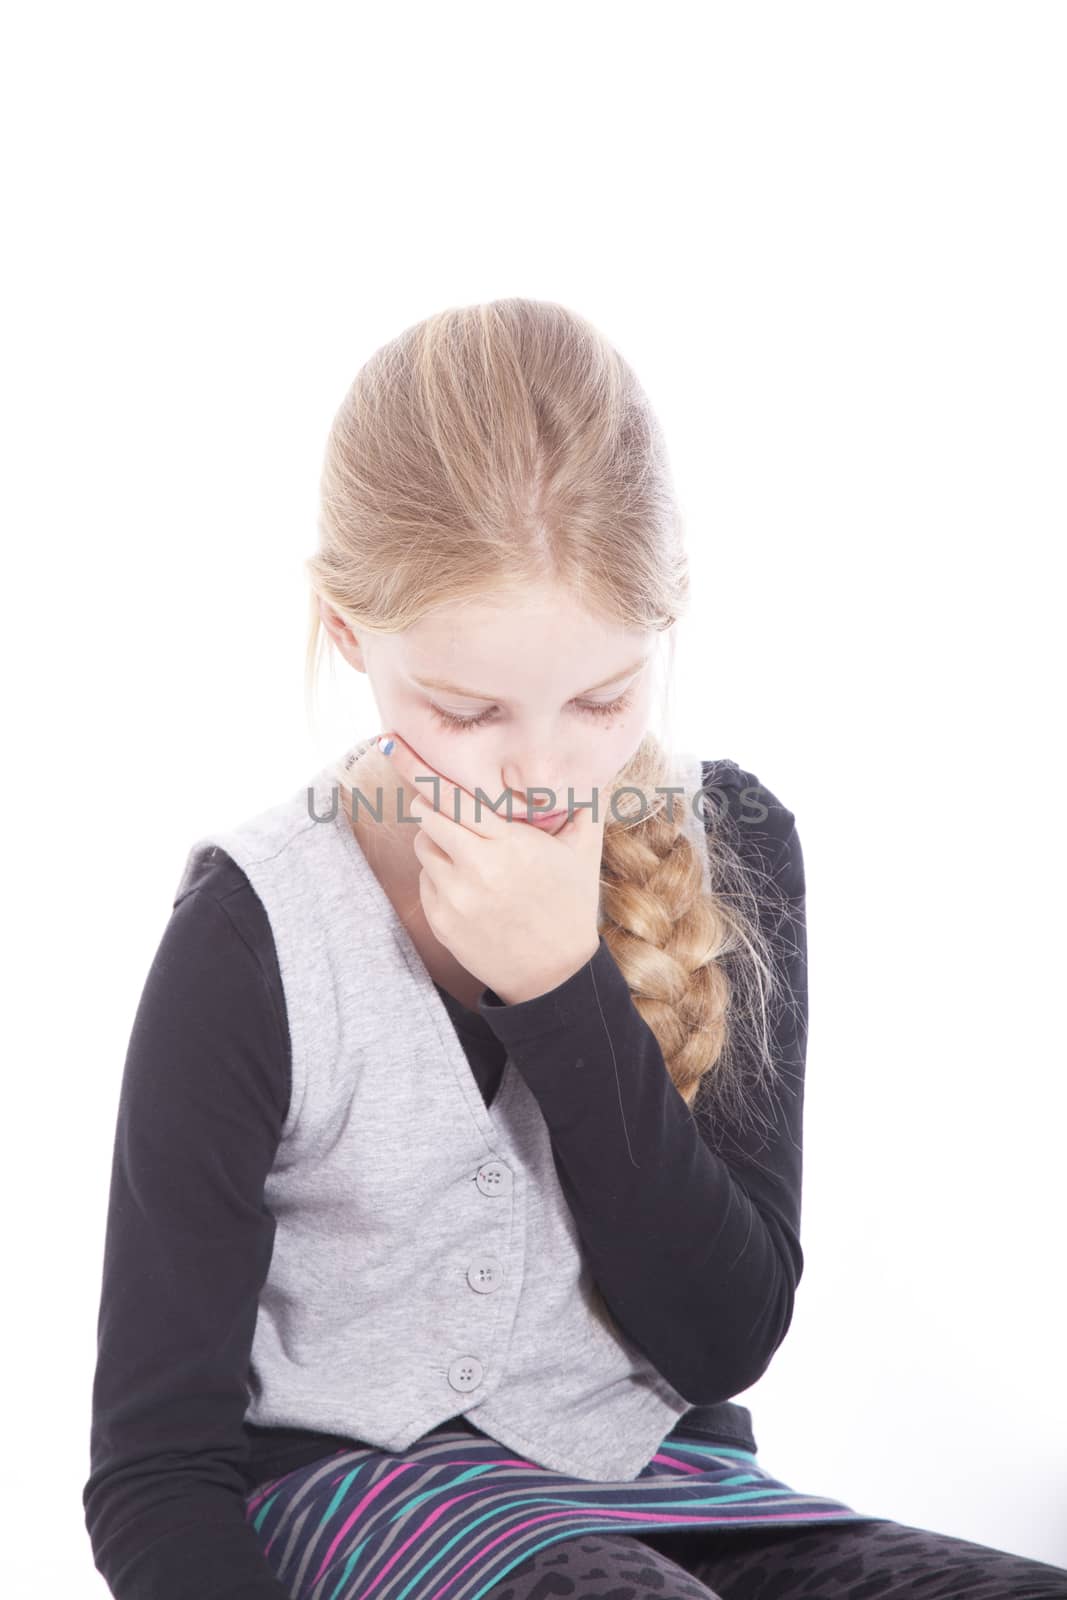 young blond girl thinking on floor of studio against white background